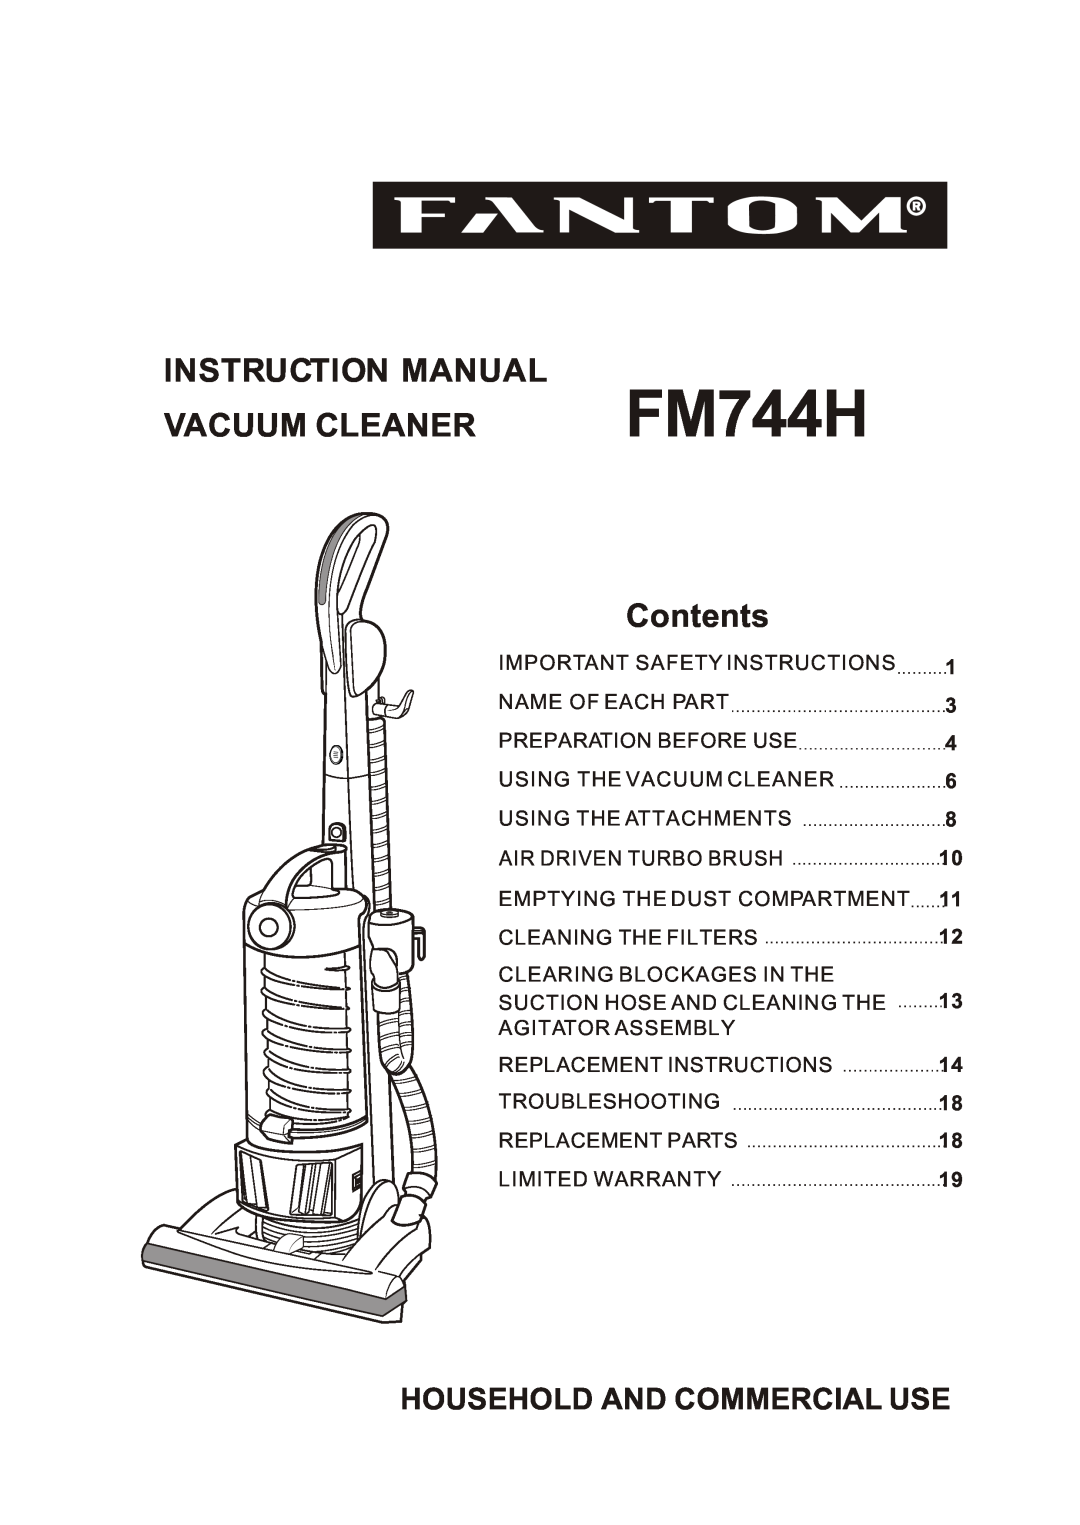 Fantom Vacuum FM744H instruction manual Vacuum Cleaner, Contents, Household And Commercial Use, 1 3 4 6 8 10 11 12 13 